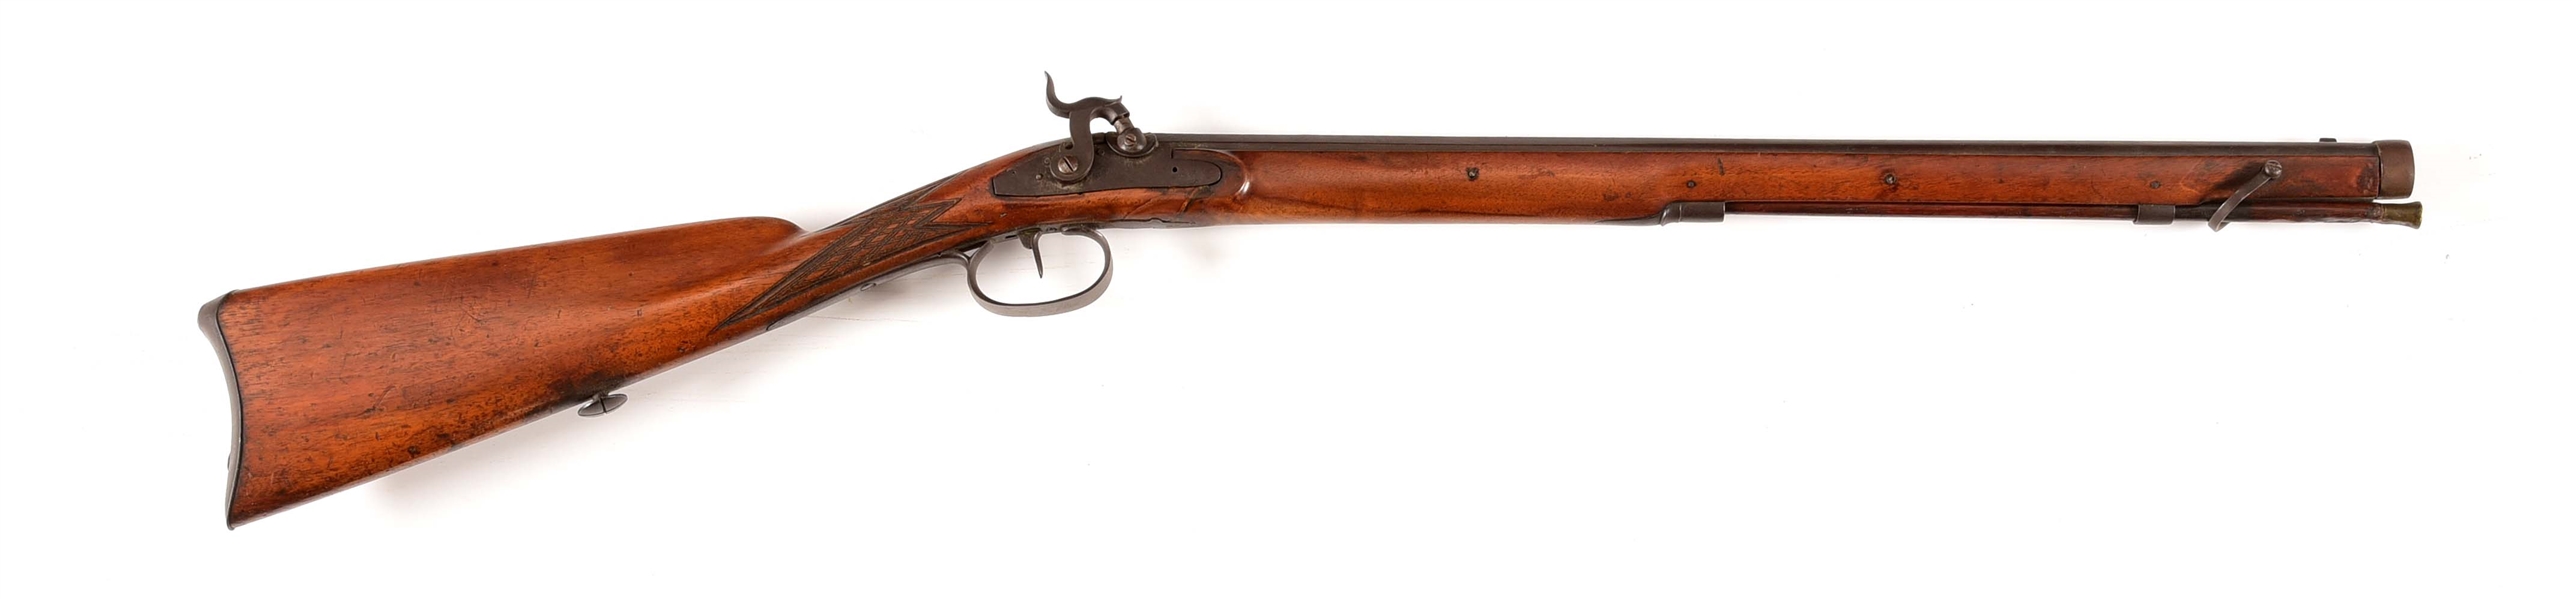 (A) CHILDS PERCUSSION RIFLE.